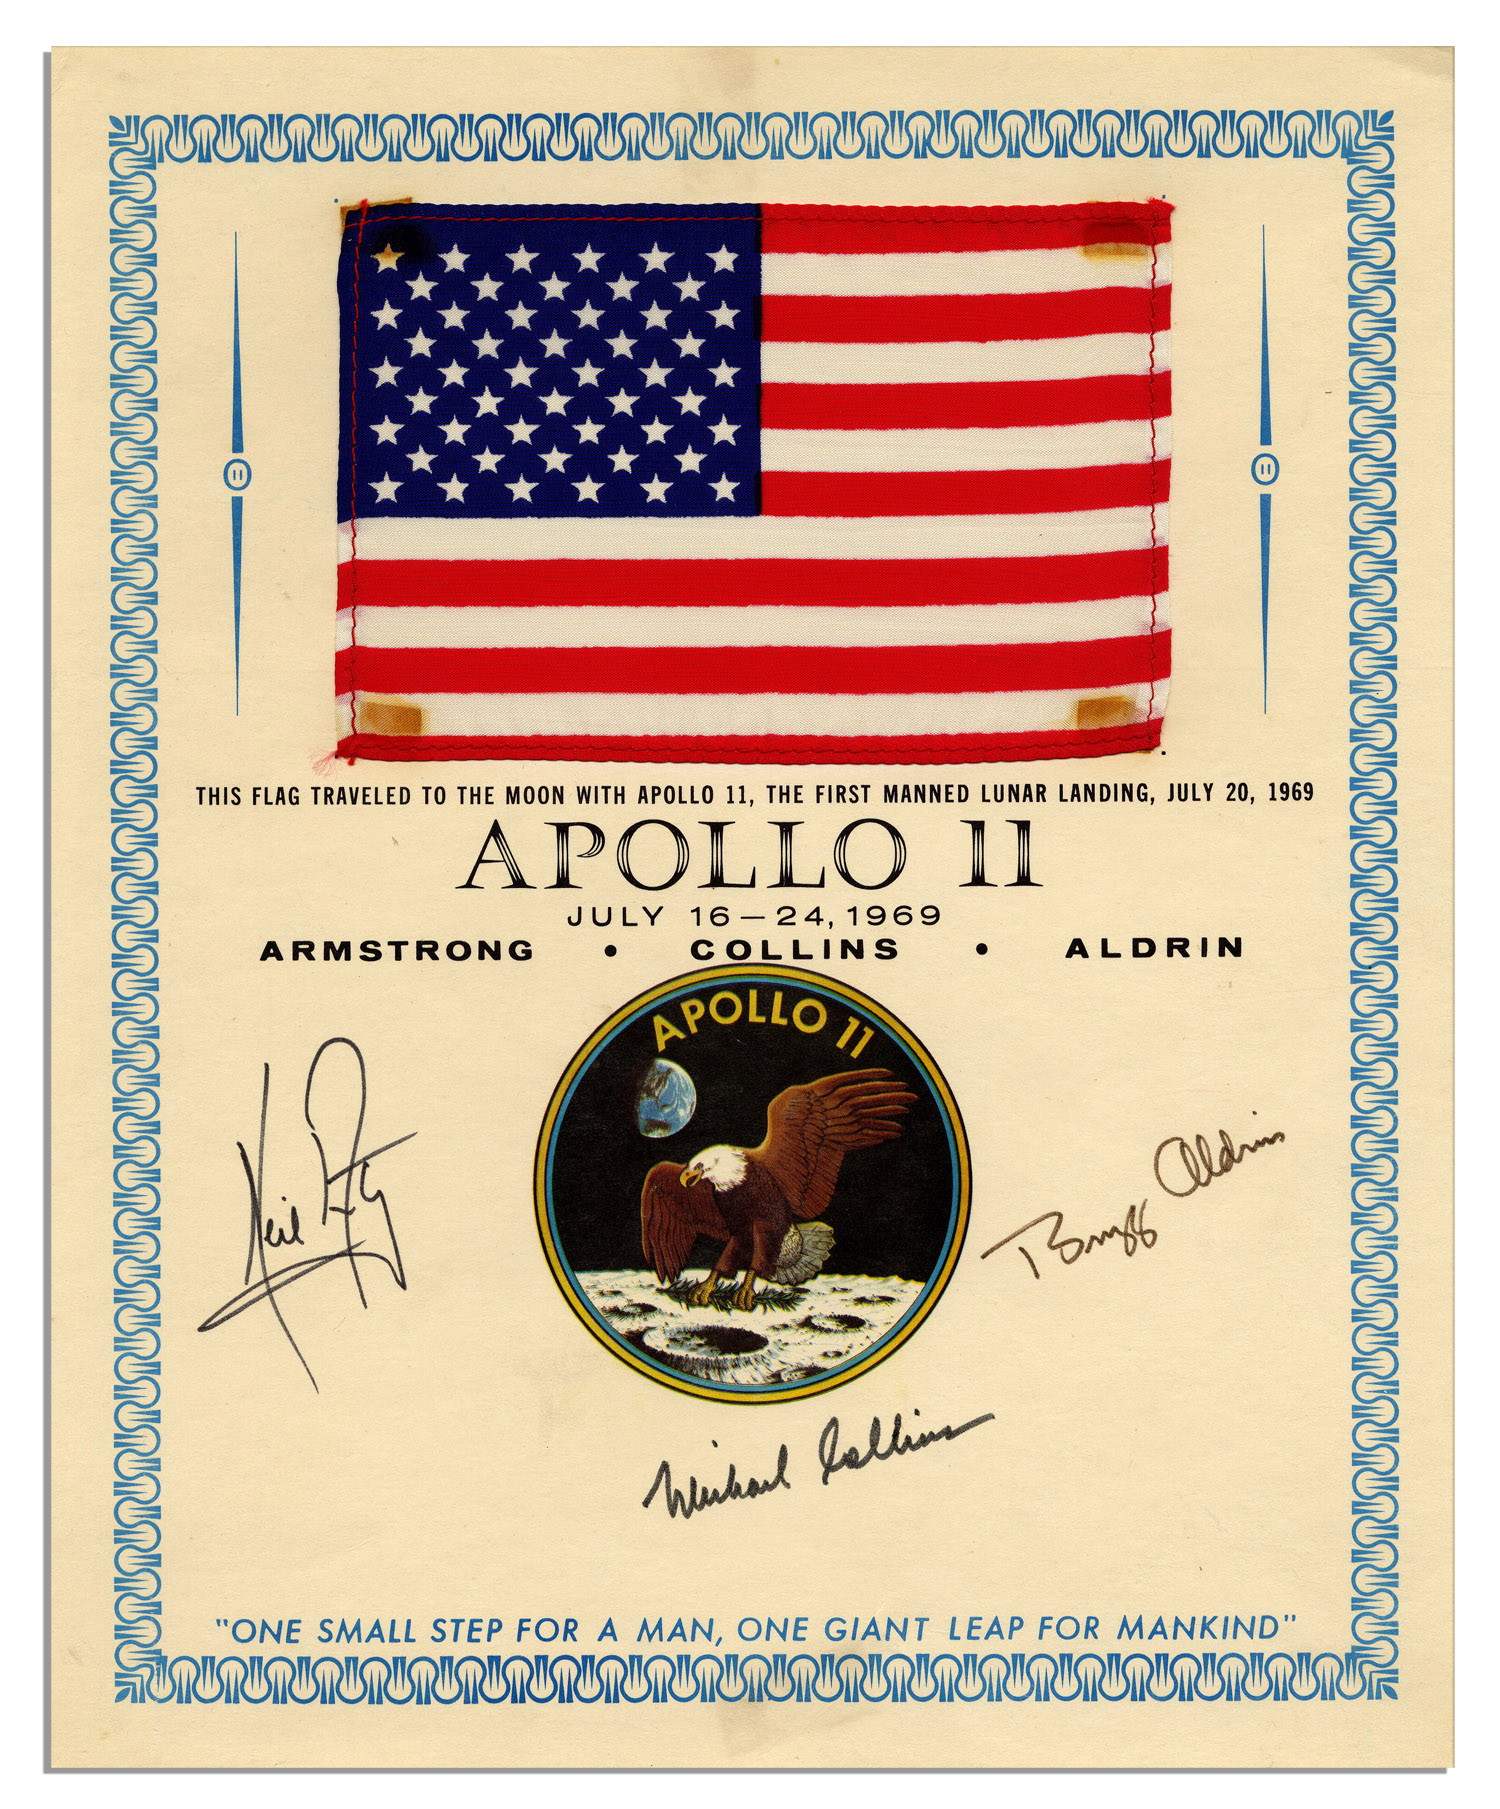 Science Auction Apollo 11 Flag Flown to the Moon Exceptionally Scarce Apollo 11 Flag Flown to the Moon -- Signed by Armstrong, Aldrin & Collins